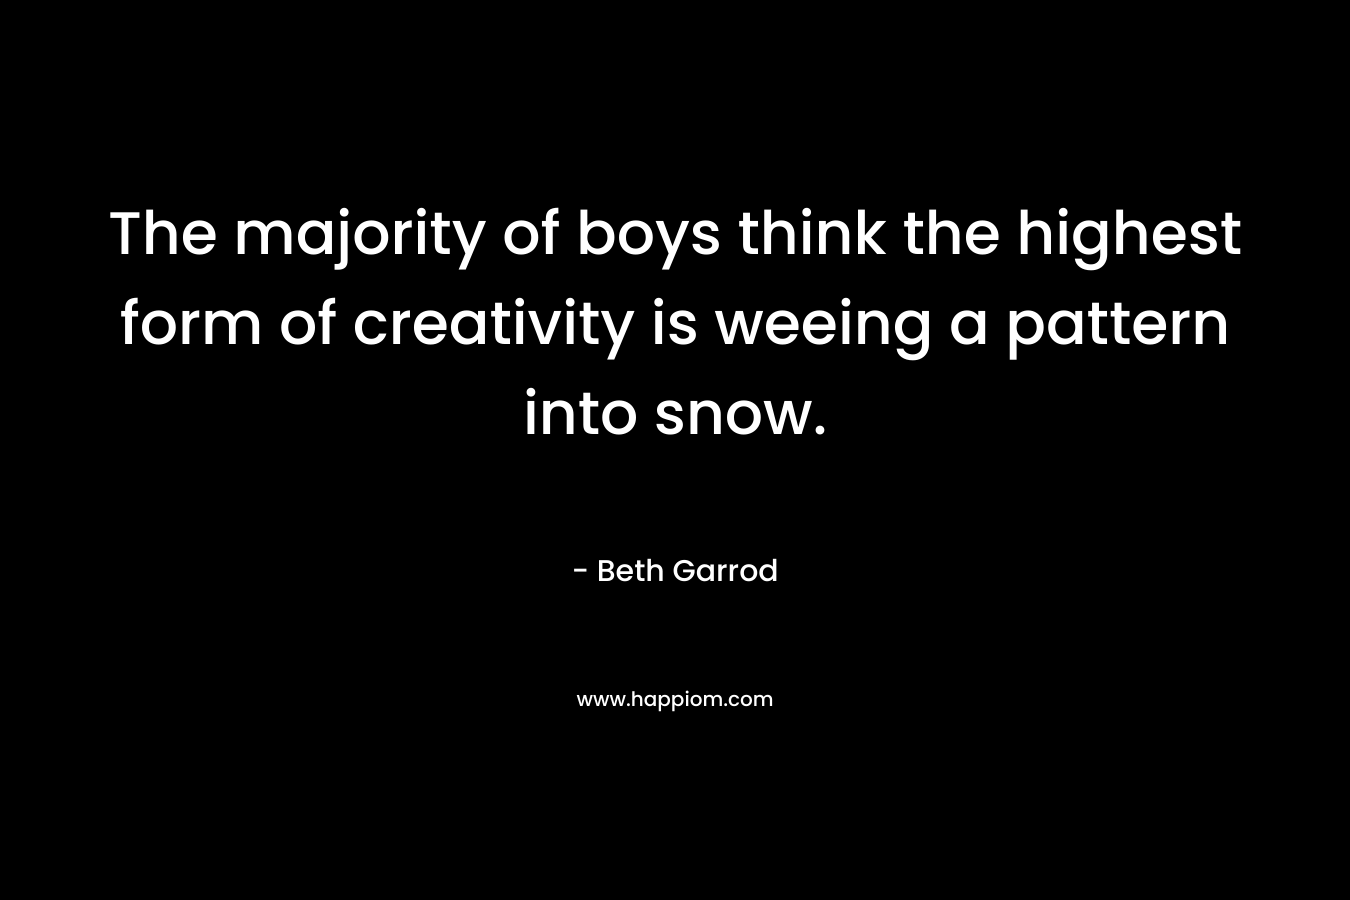 The majority of boys think the highest form of creativity is weeing a pattern into snow.